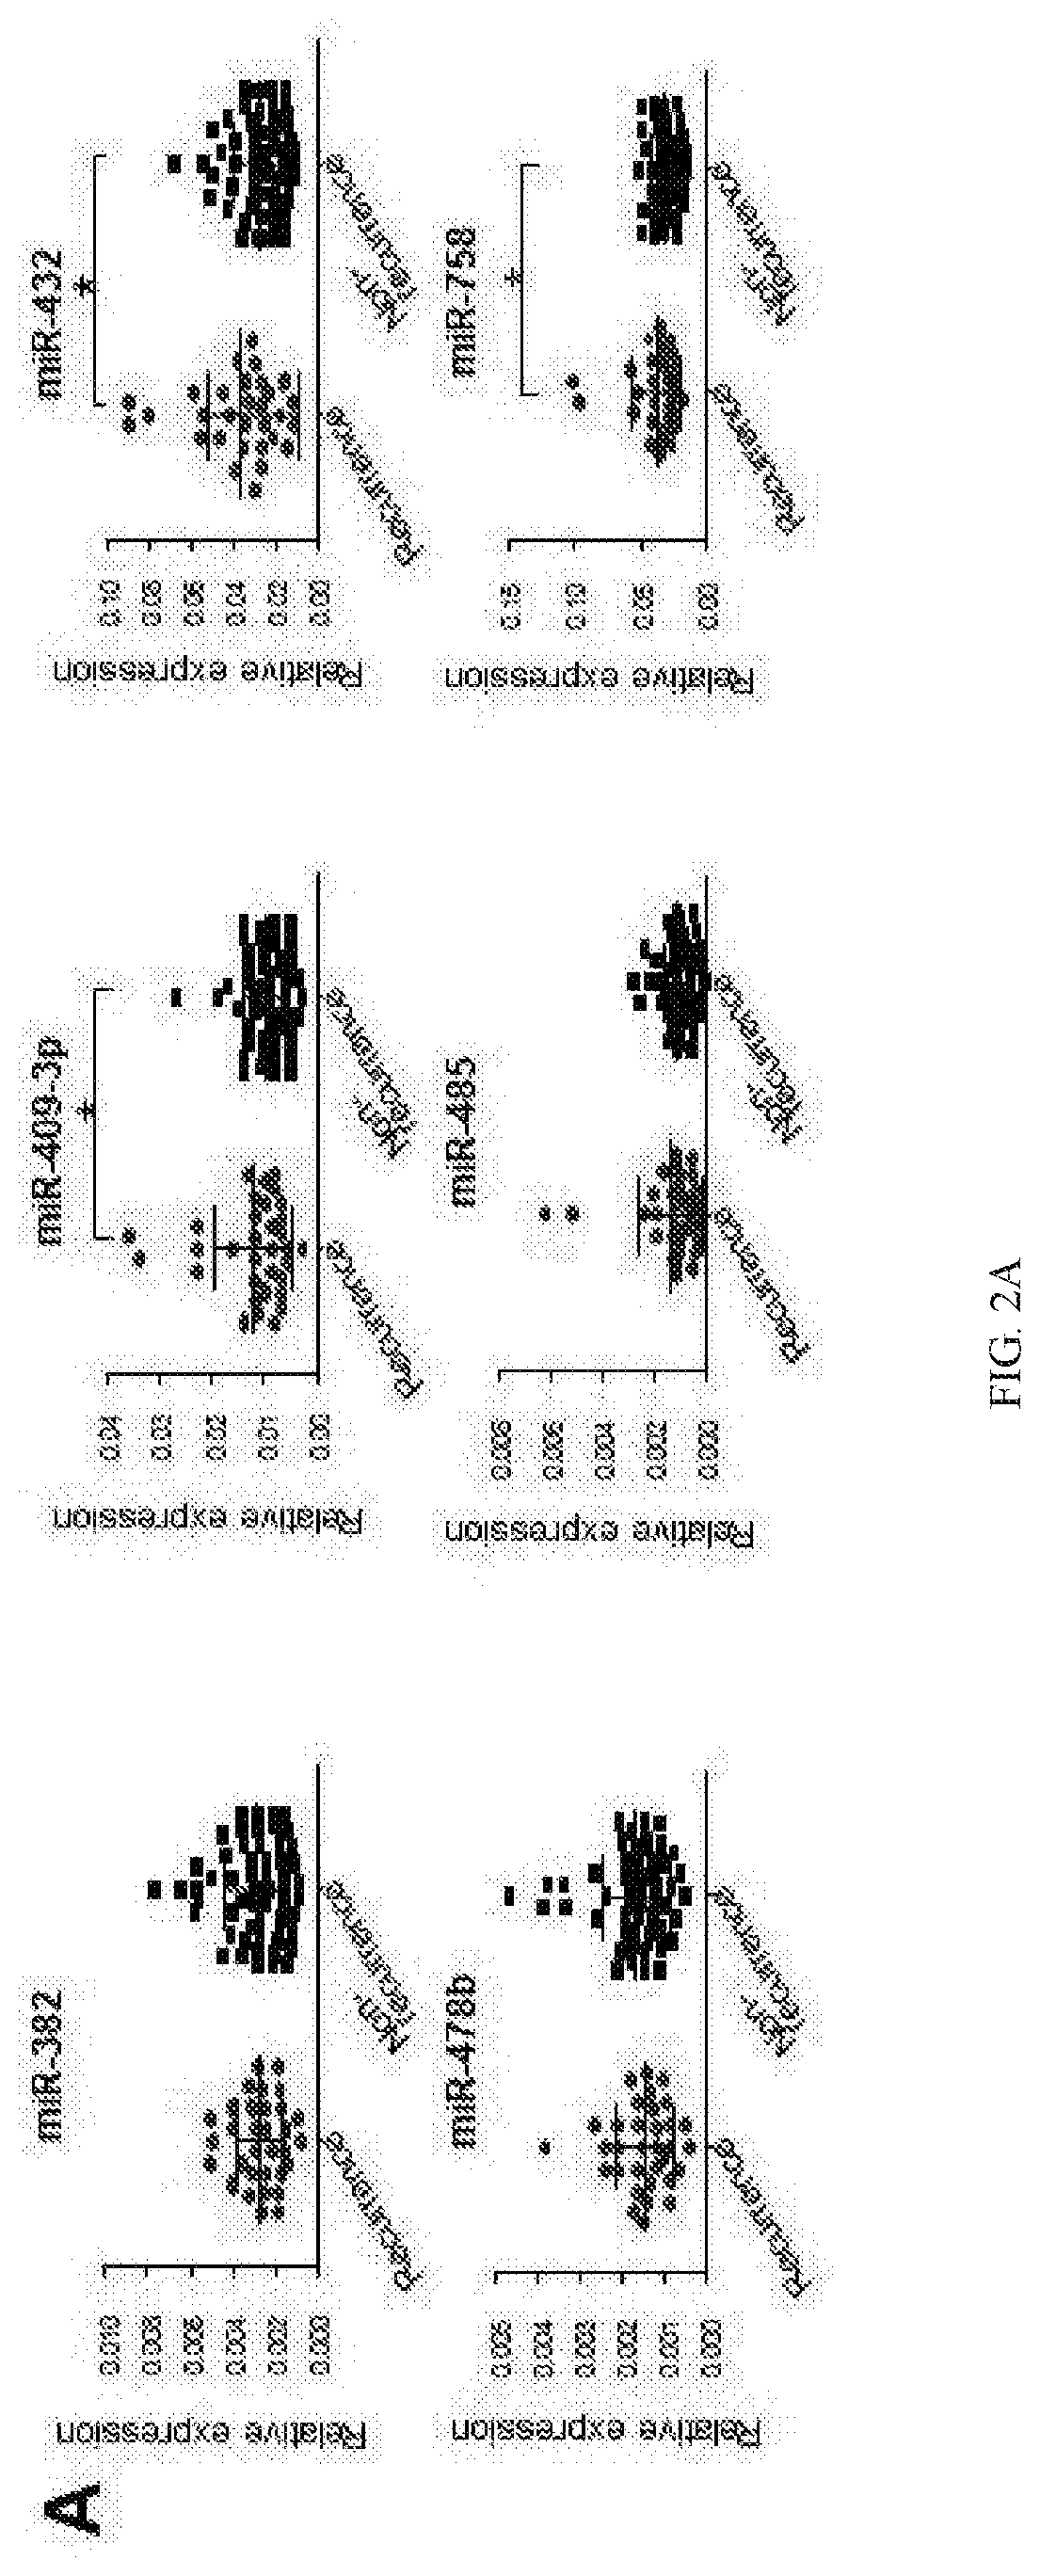 Methods for diagnosing, prognosing, and treating colorectal cancer using biomarker expression